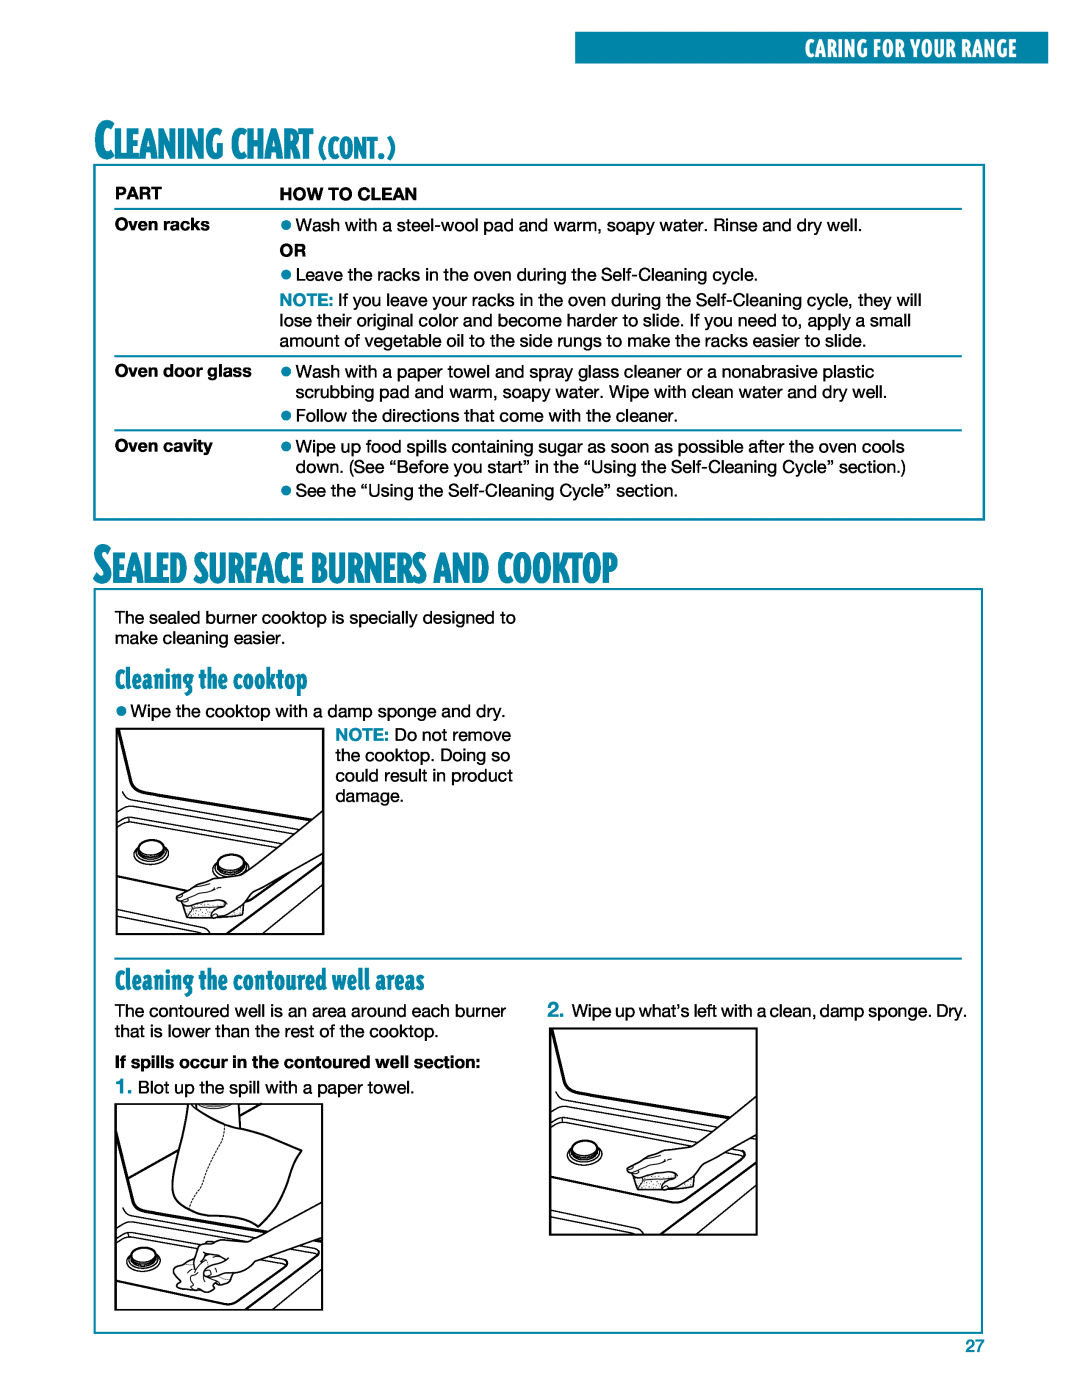 Whirlpool SF385PEE Cleaning Chart Cont, Sealed Surface Burners And Cooktop, Cleaning the cooktop, Caring For Your Range 